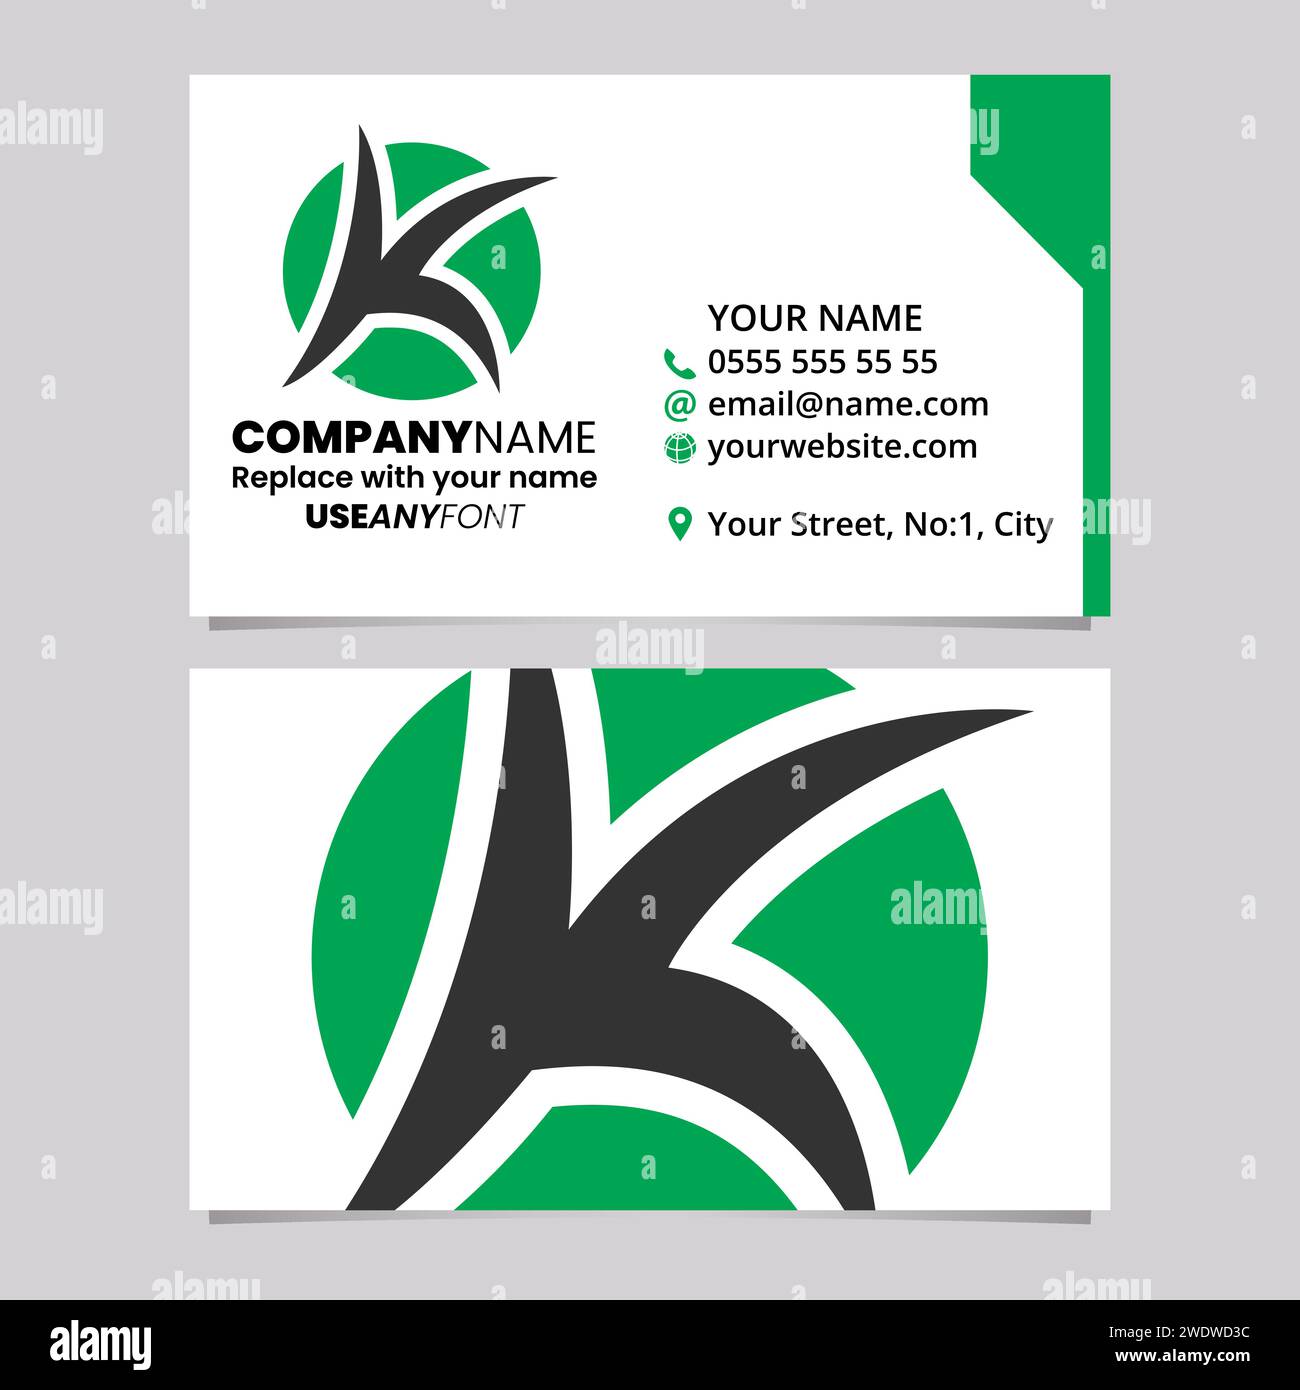 Green and Black Business Card Template with Round Pointy Letter K Logo Icon Over a Light Grey Background Stock Vector